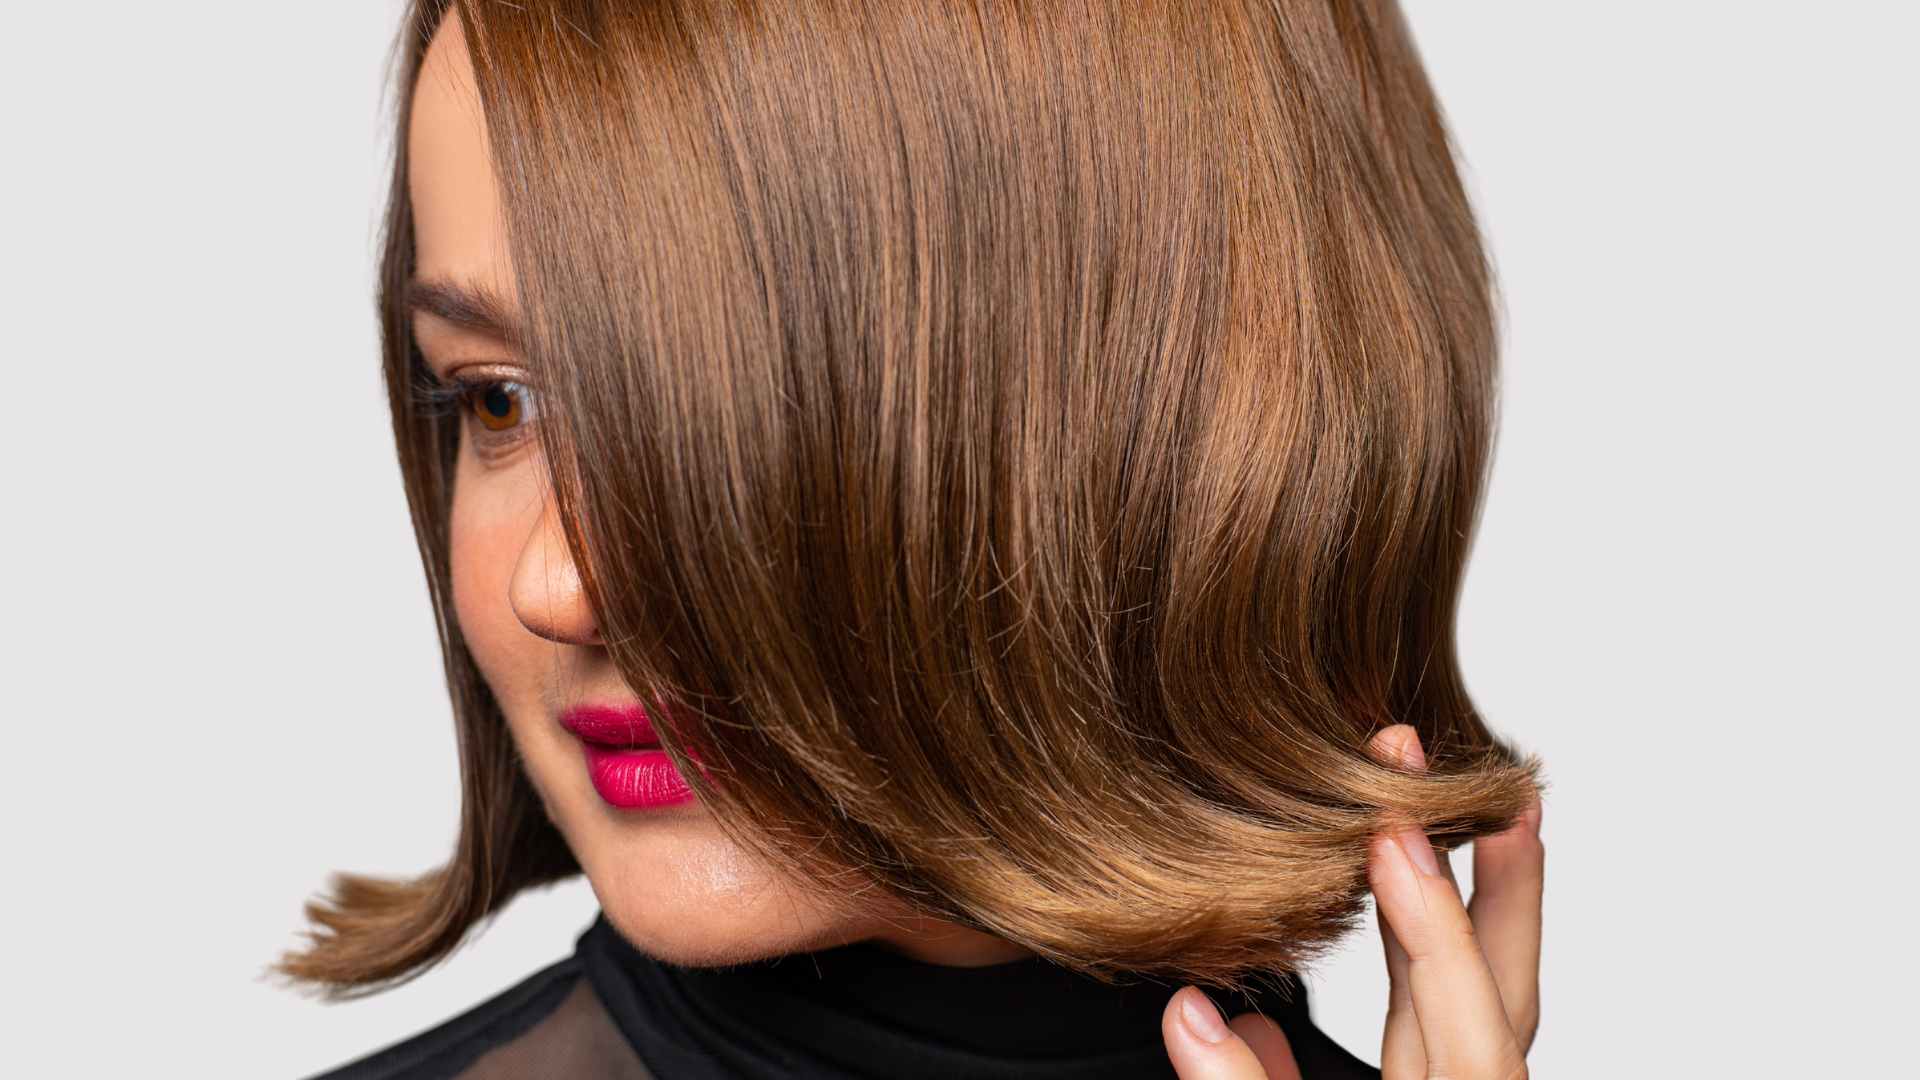 14 Different Ways to Style Your Bob Haircut